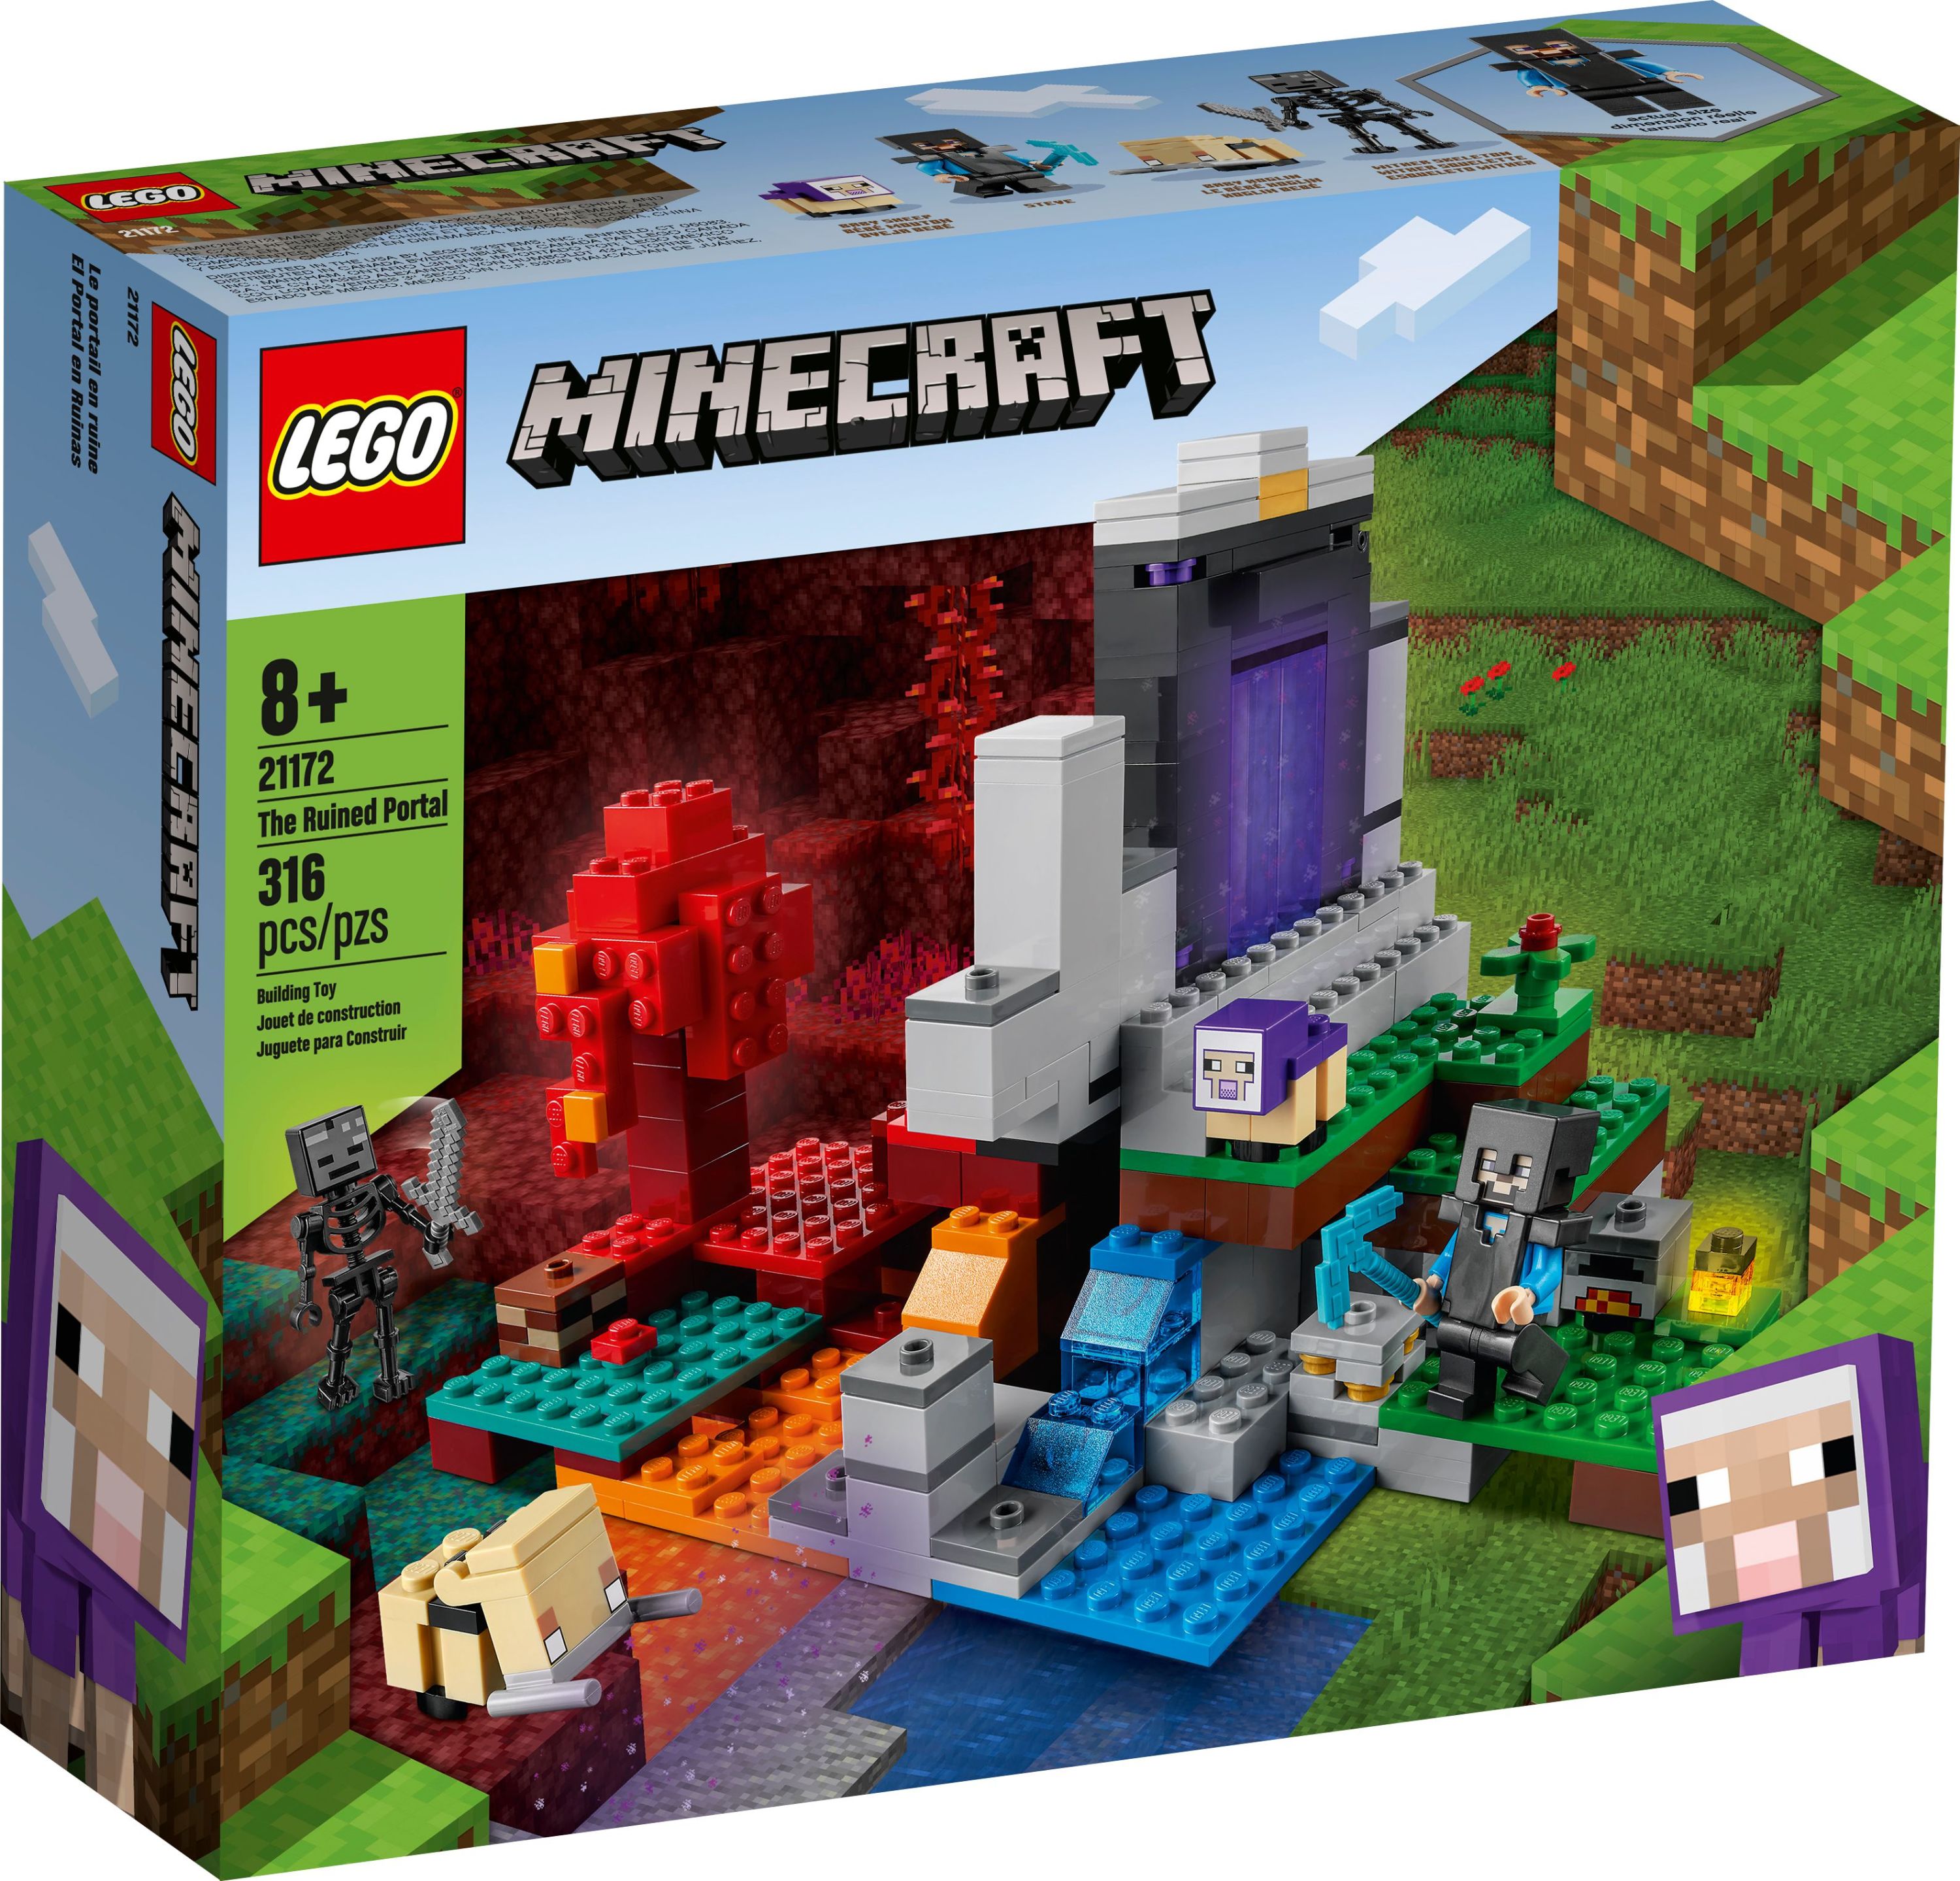 LEGO Minecraft The Ruined Portal Building Toy 21172 with Steve and Wither Skeleton Figures, Gift Idea for 8 Plus Year Old Kids, Boys & Girls - image 3 of 8